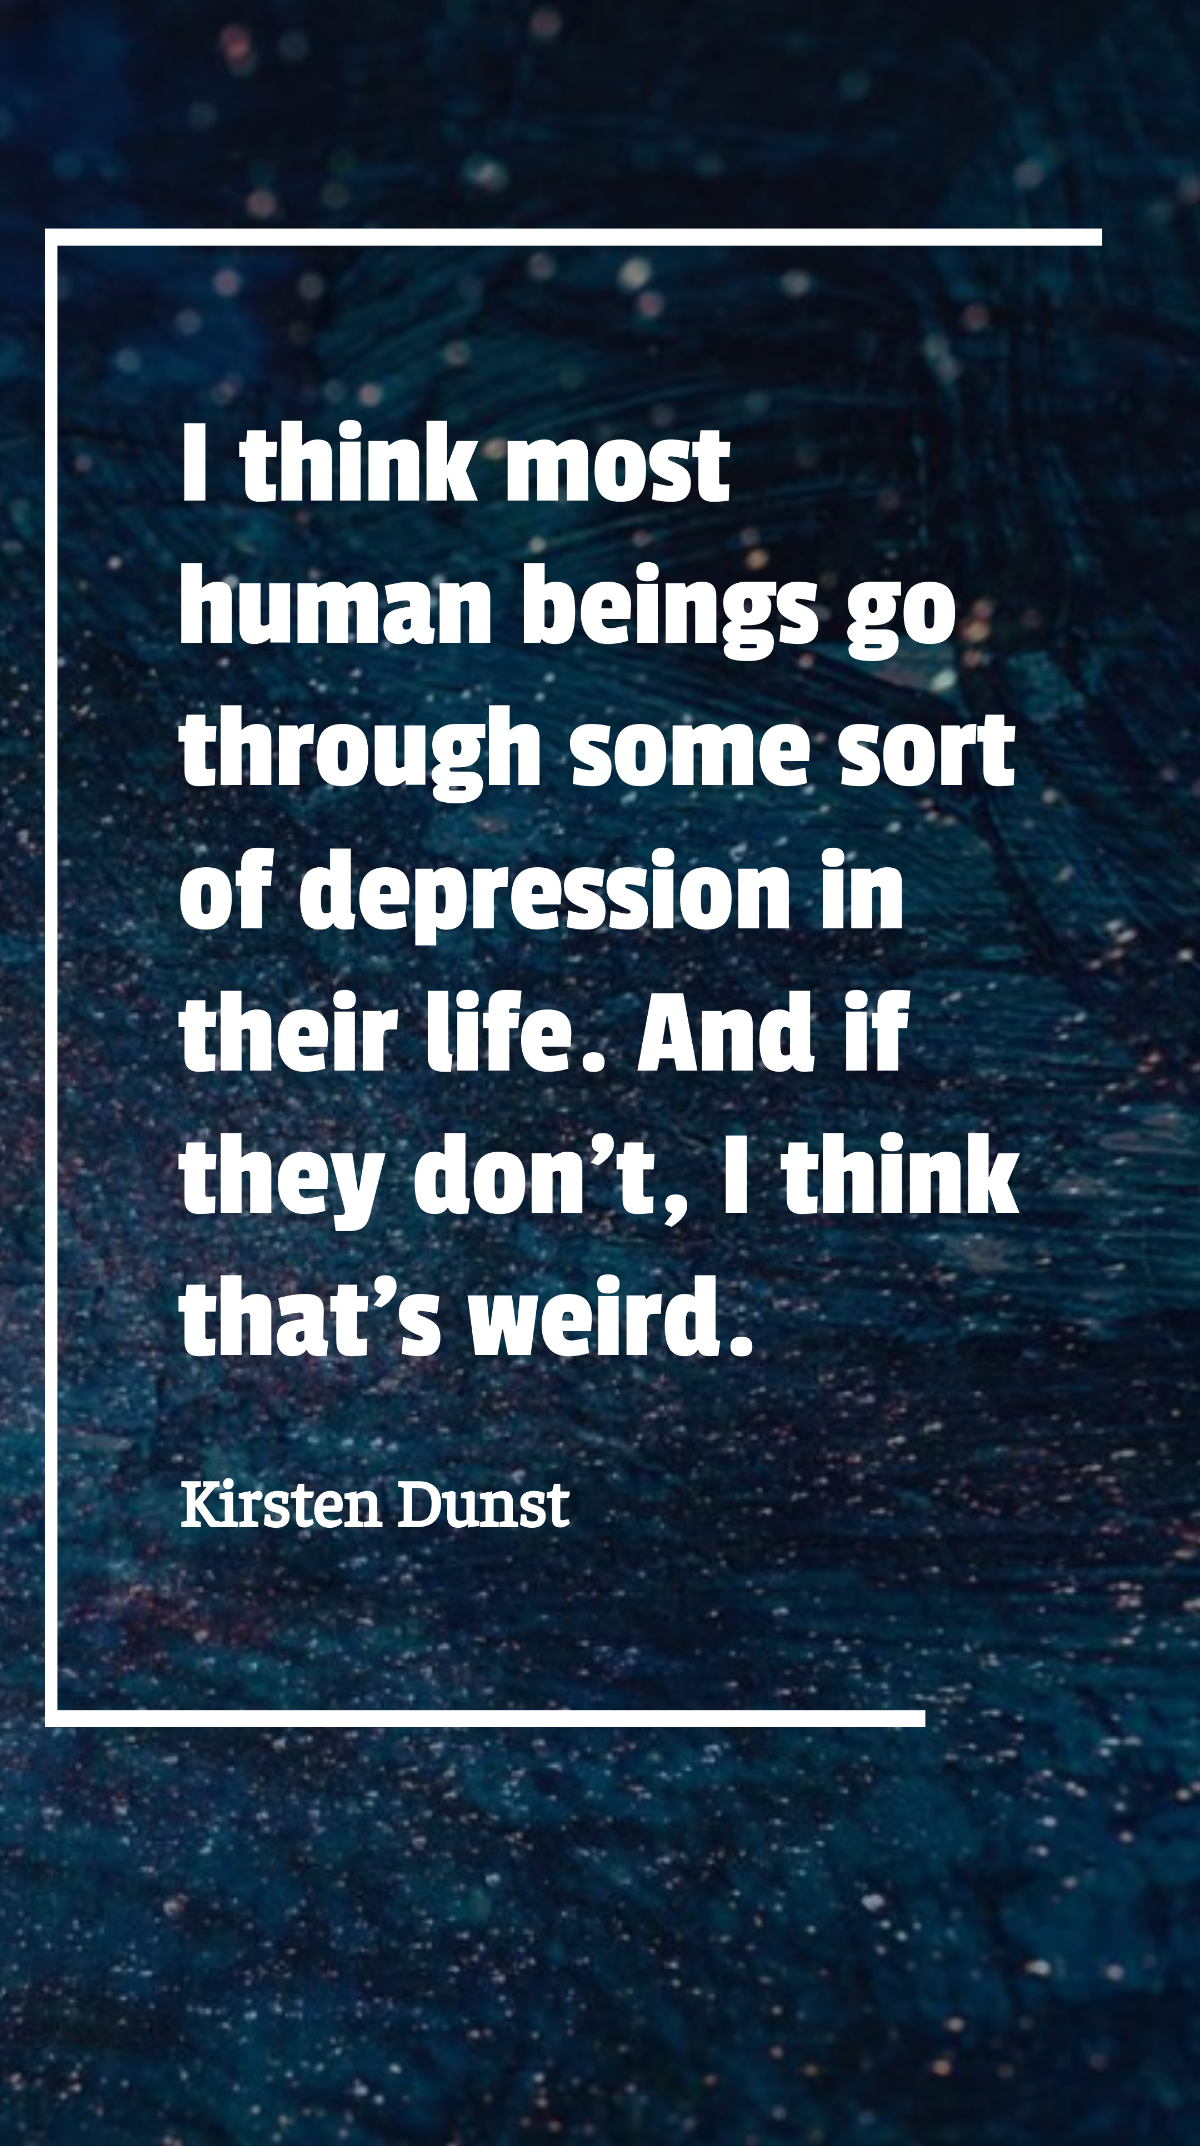 Kirsten Dunst - I think most human beings go through some sort of depression in their life. And if they don't, I think that's weird. Template